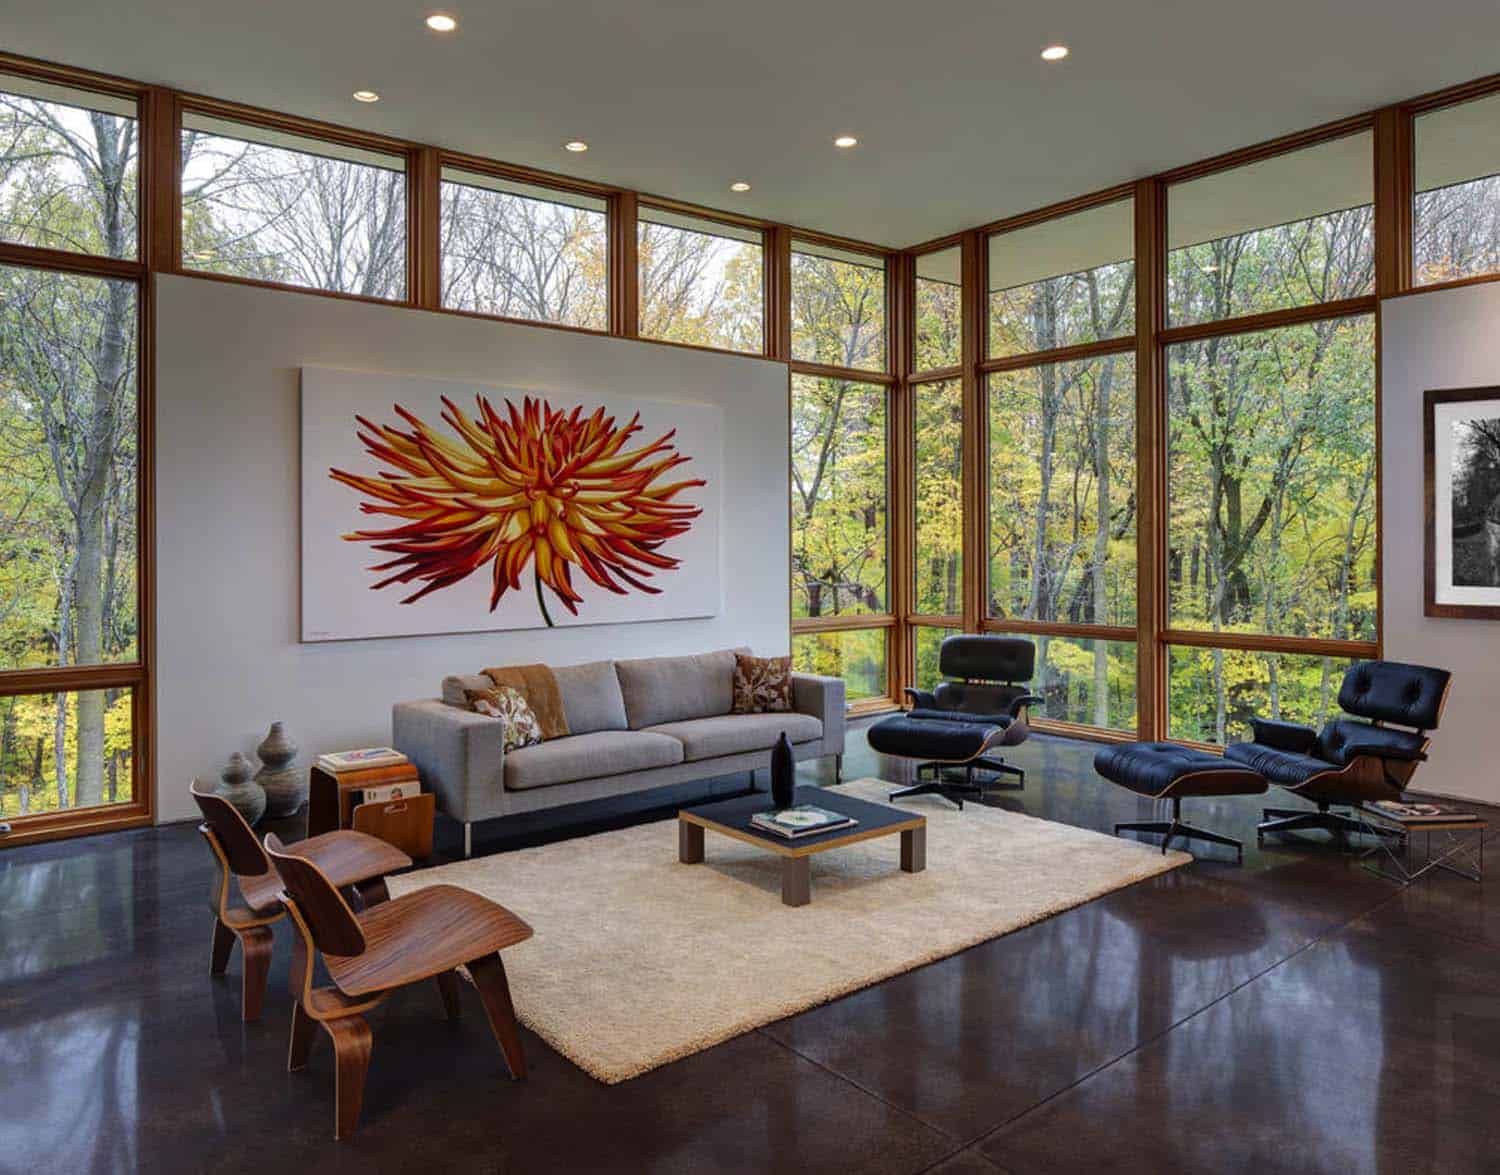 Visually striking modern refuge surrounded by forest in Wisconsin